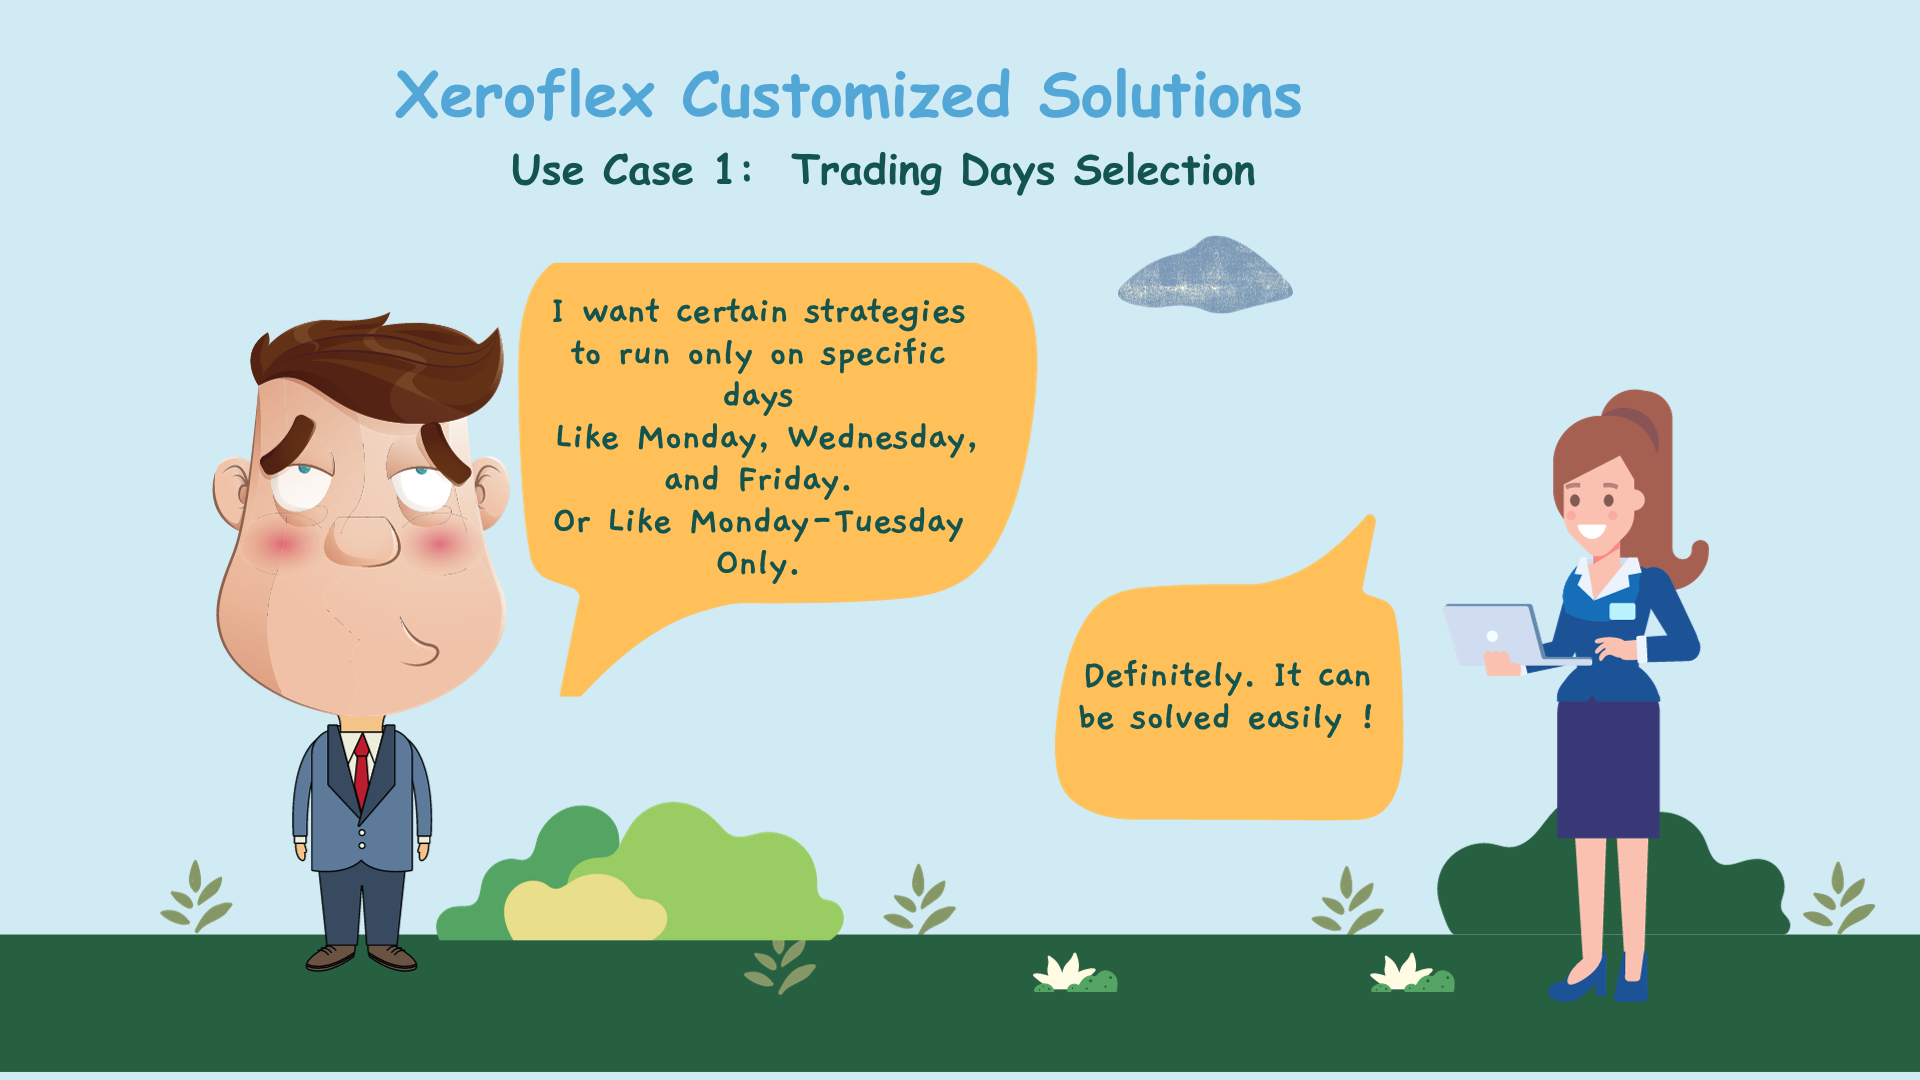 Use Case 1:  Trading Days Selection